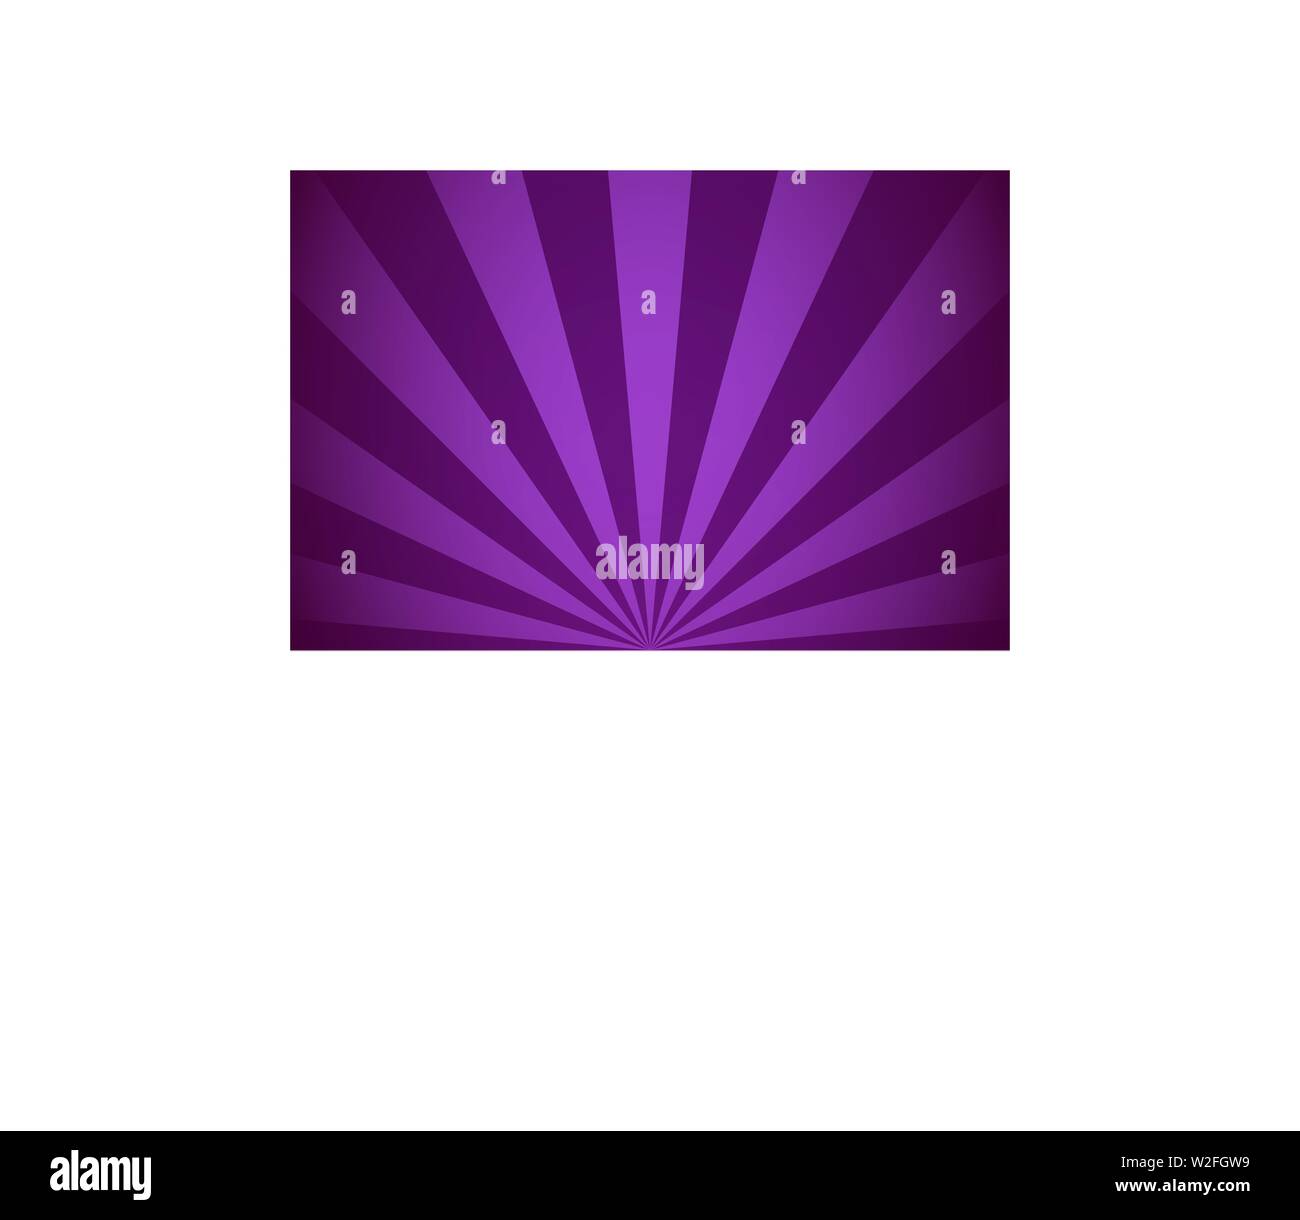 Violet rays abstract vector illustration radial lines background Stock Vector